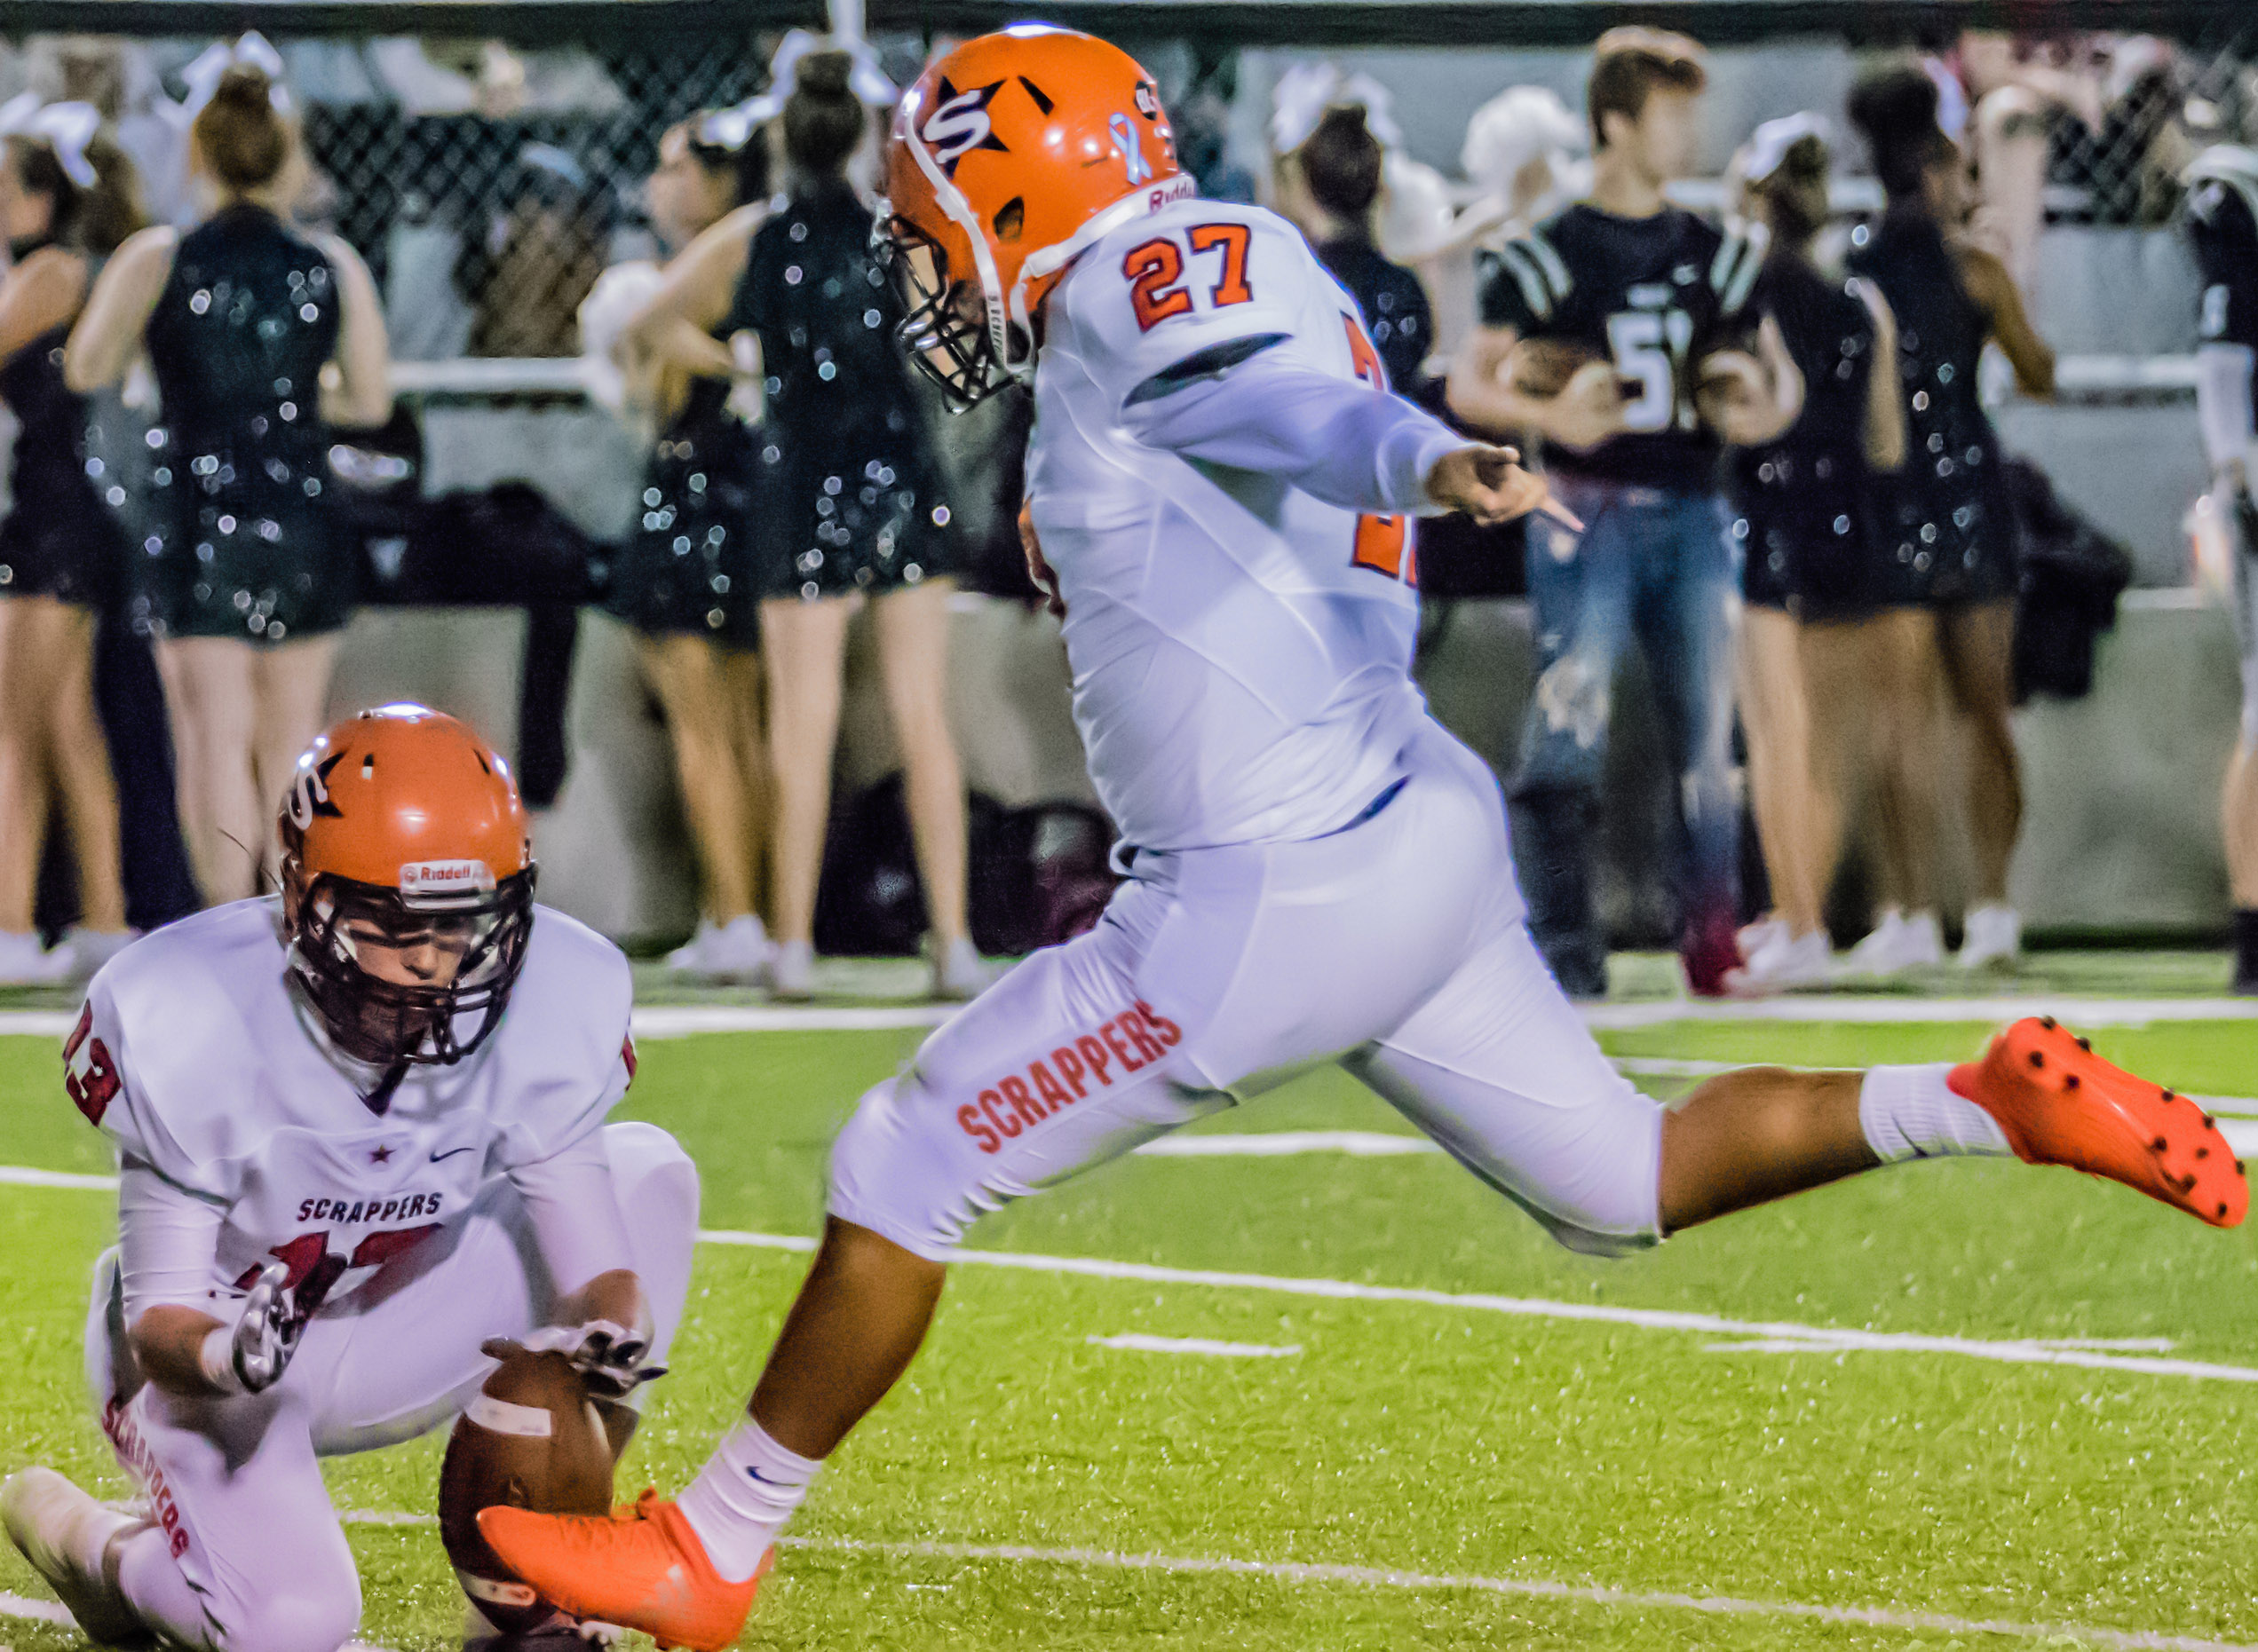 Jose Hernandez (27) kicks the PAT for the Scrappers as Zach Jamison holds. Hernandez made 7 of 7 extra point attempts in the regular season finale at Bauxite.